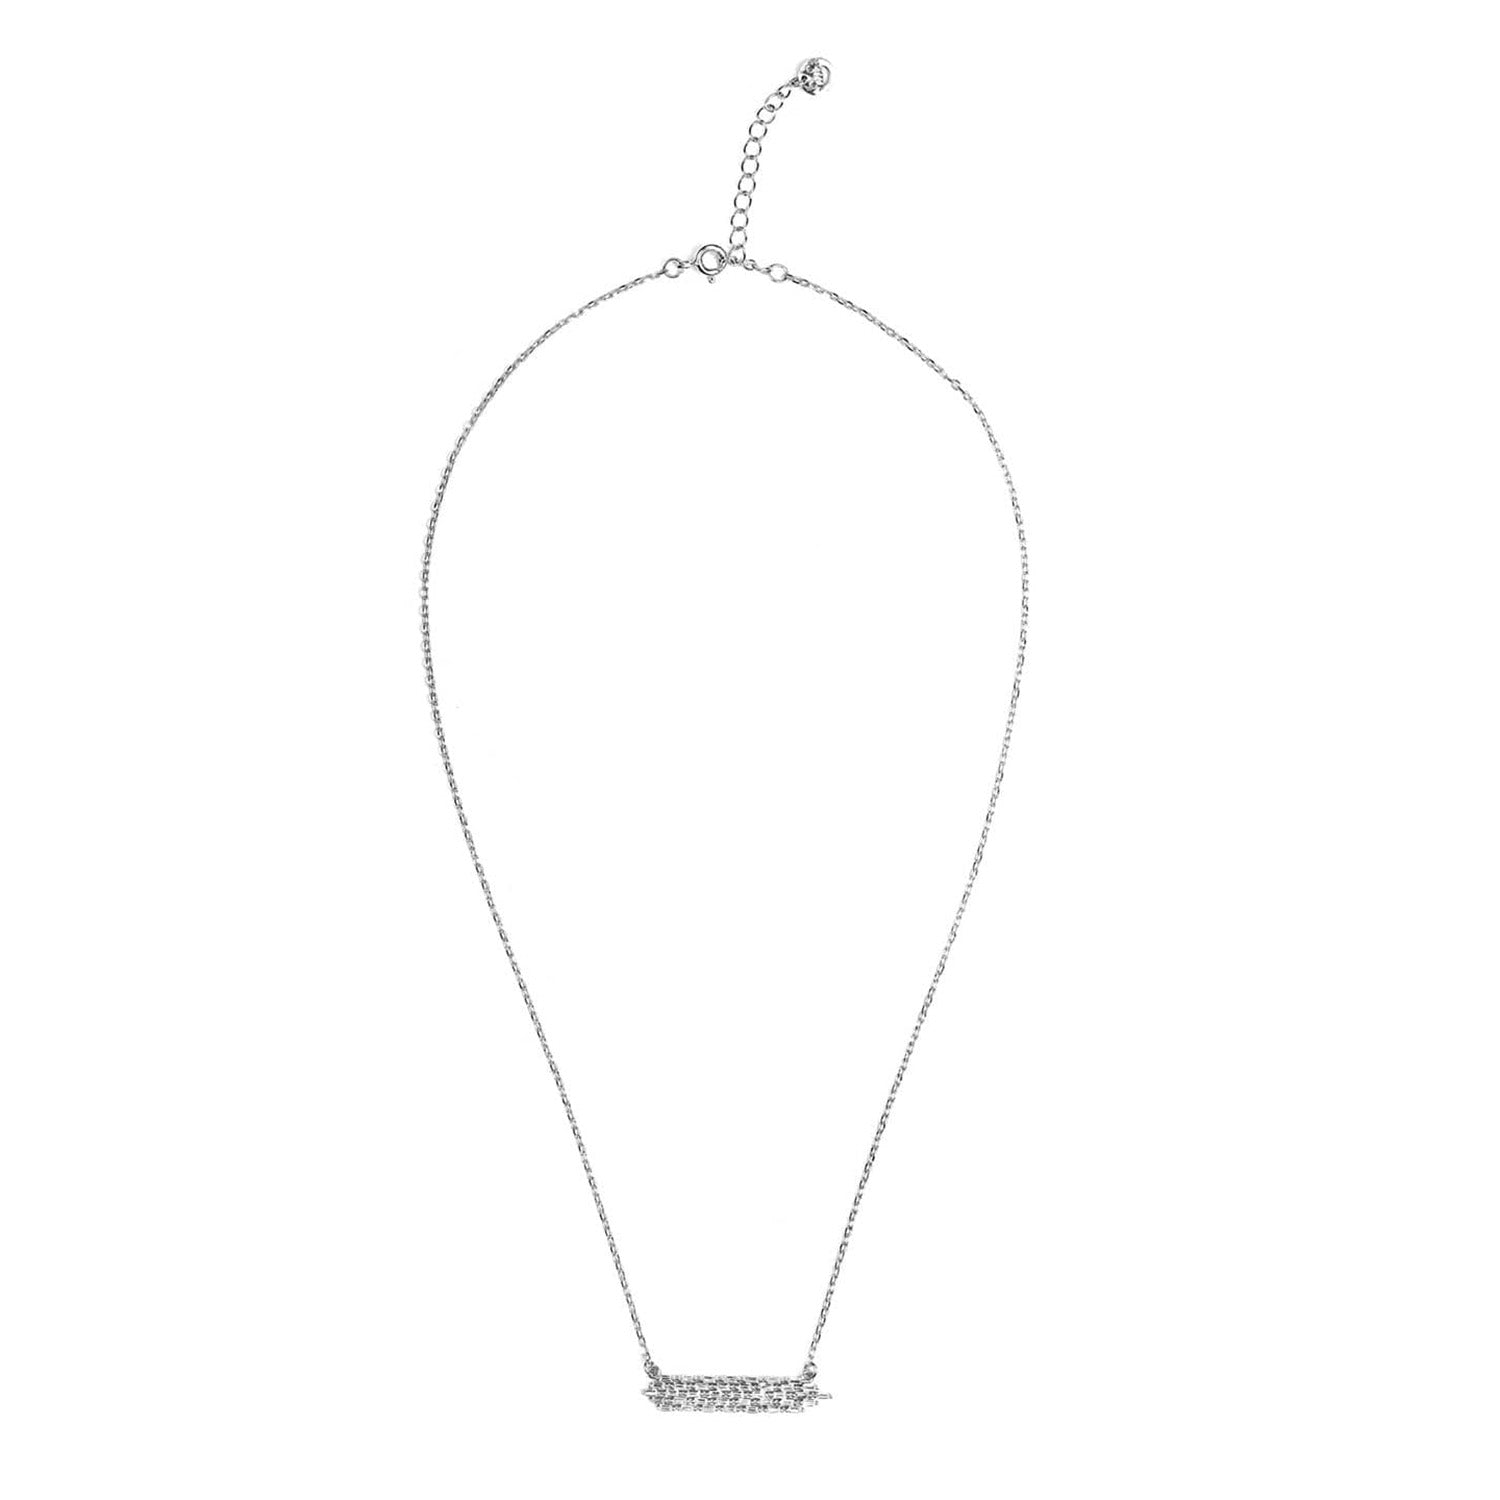 French Baguette 925 Silver Necklace